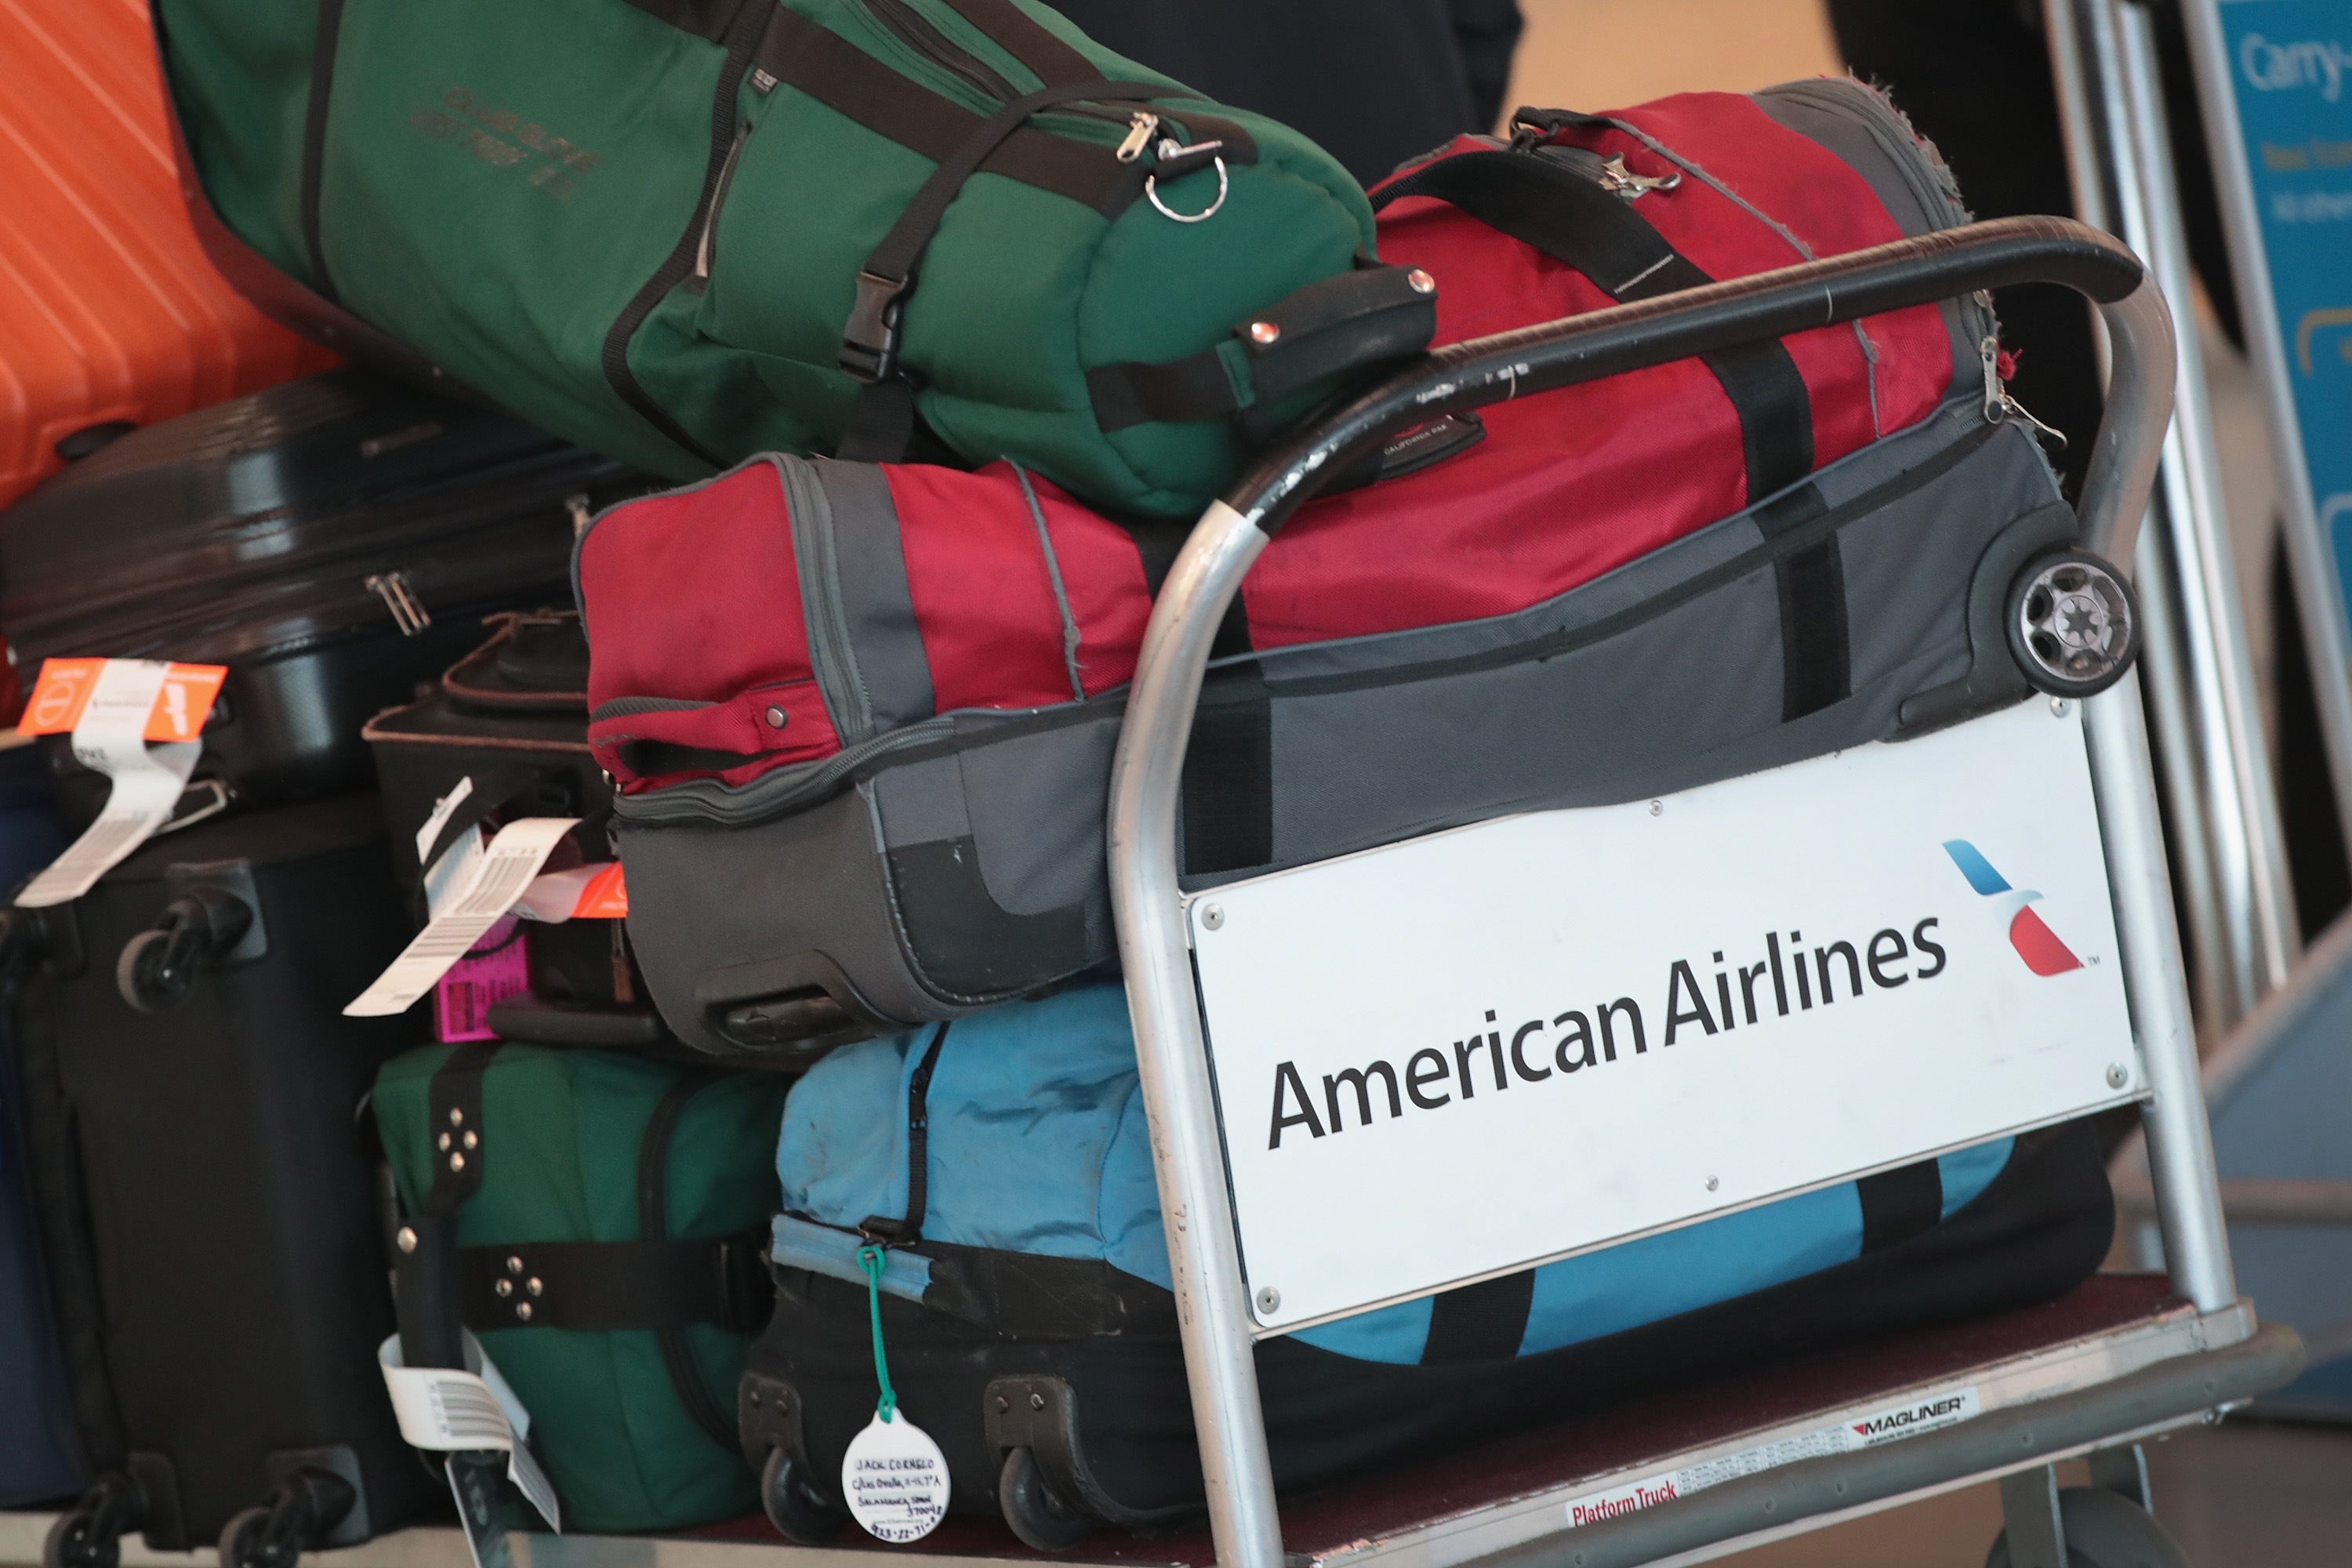 Luggage is prepared for an American Airlines flight at O'Hare International Airport in Chicago.